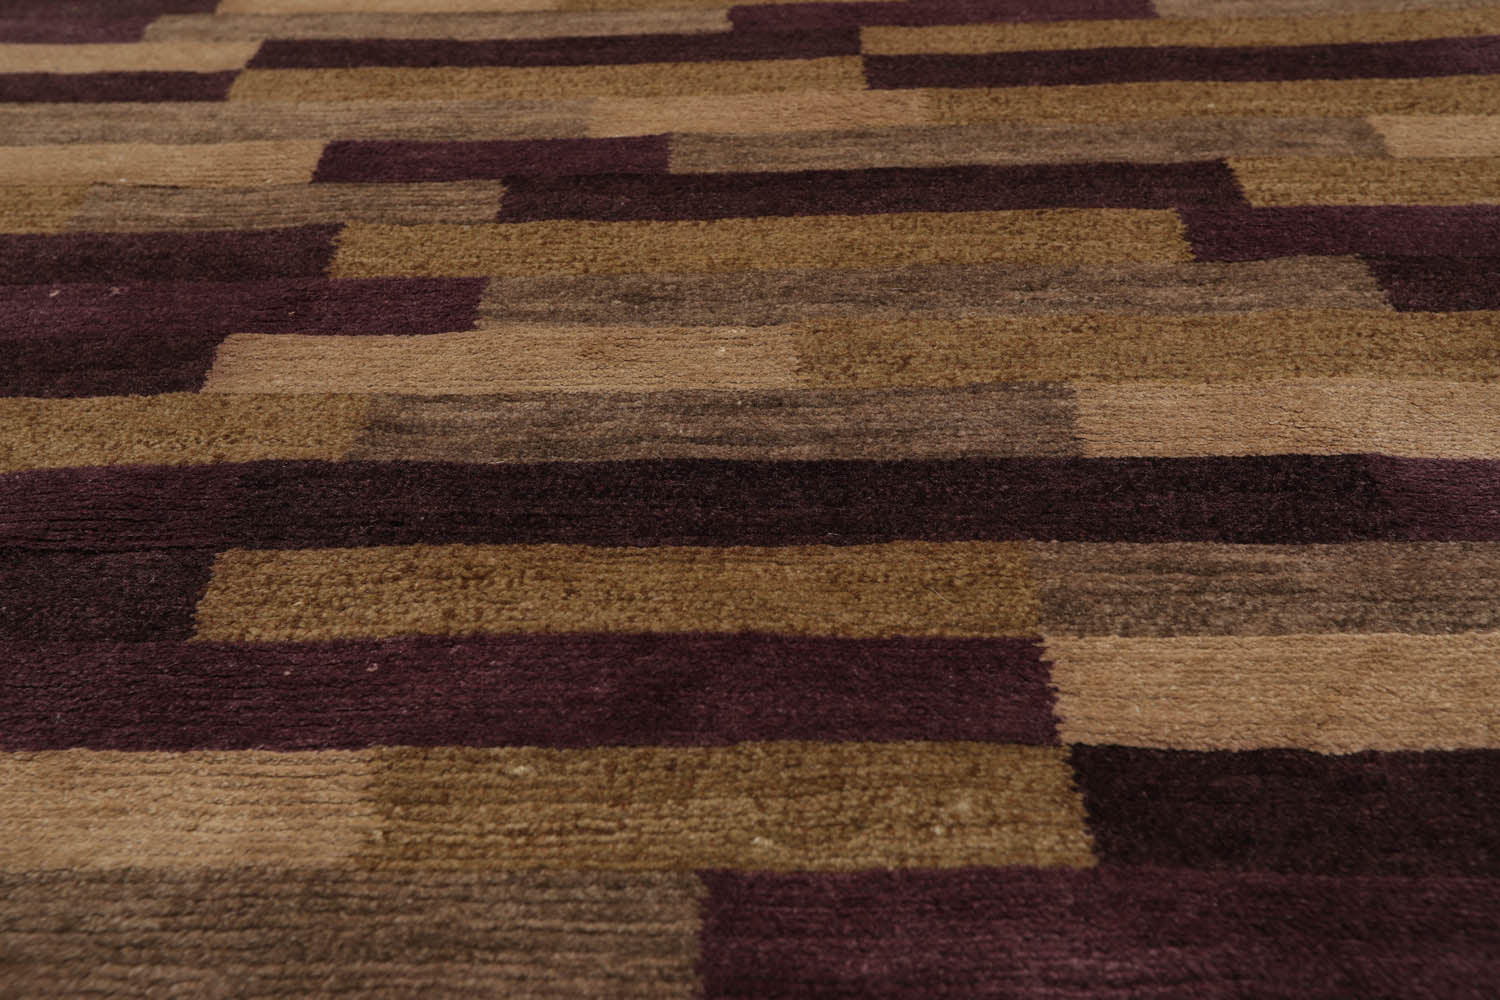 Enis 3x5 Aubergine Hand Knotted Tibetan Contemporary  Striped Wool & Silk Oriental Area Rug